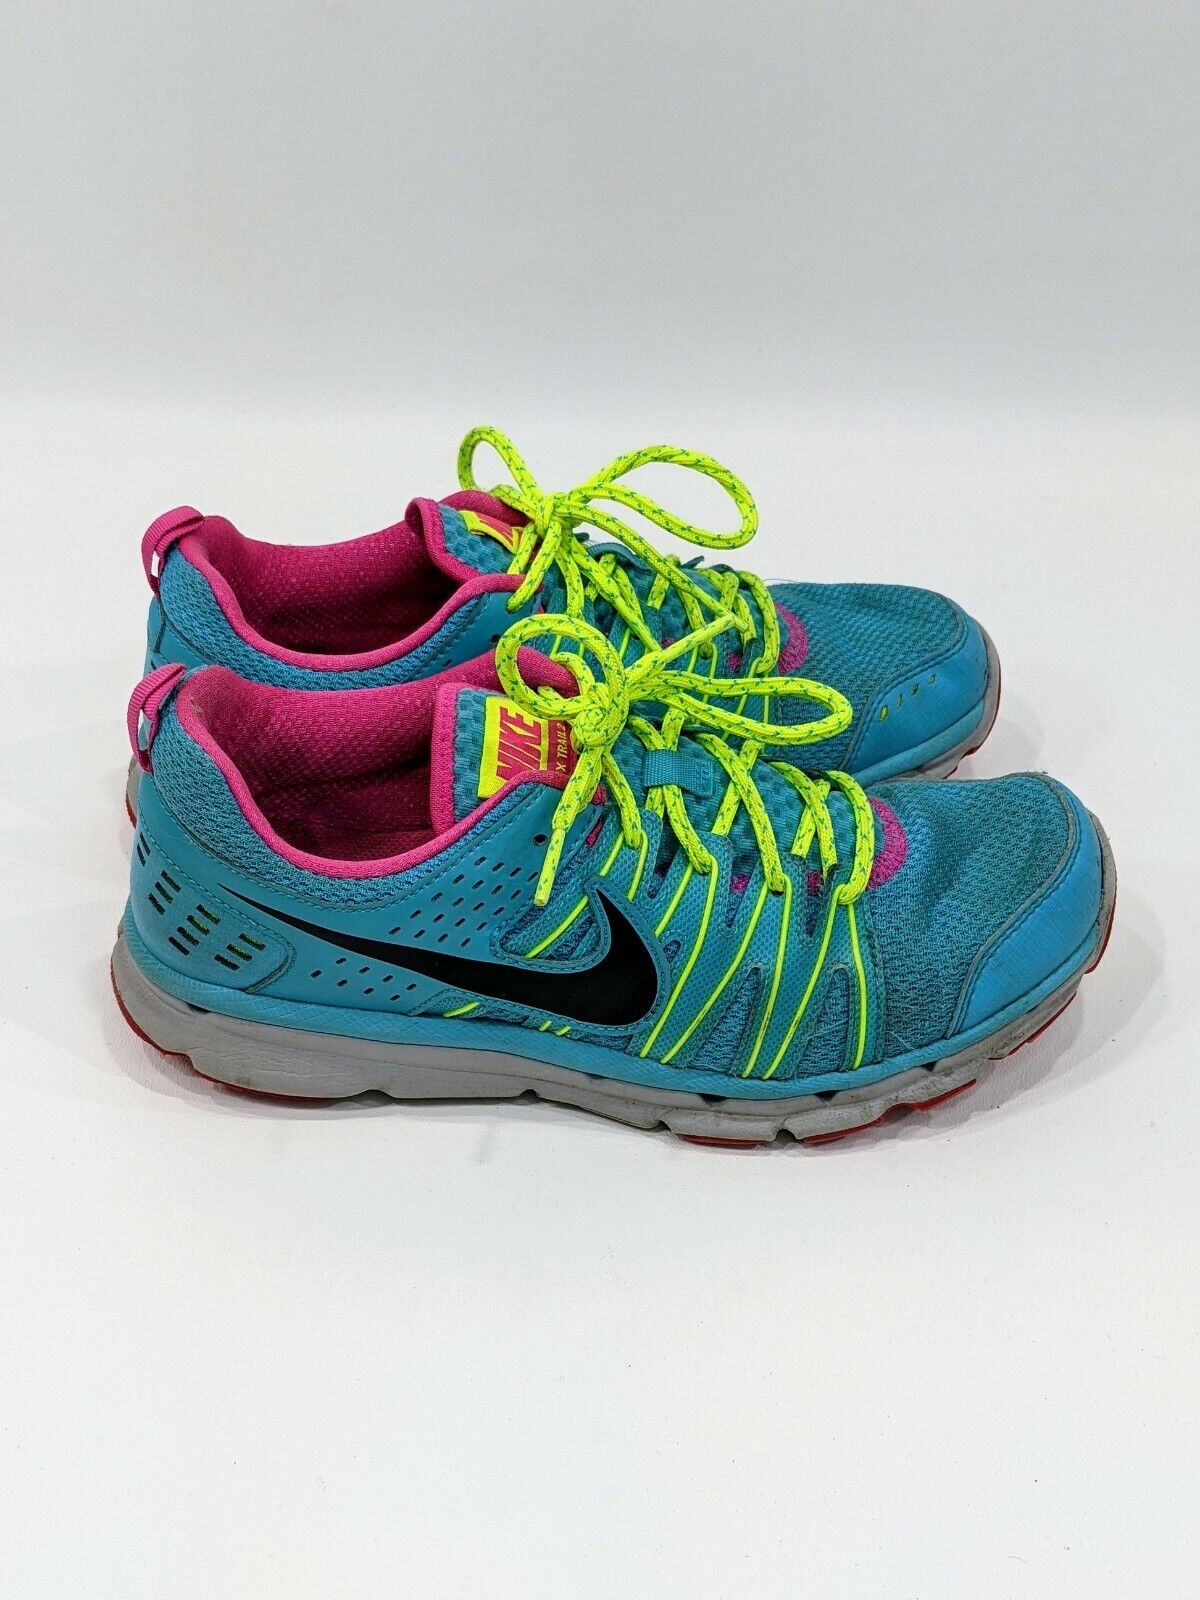 Nike Trail 2 Womens Size Blue Lime Pink Trail Running 616681-400 | eBay